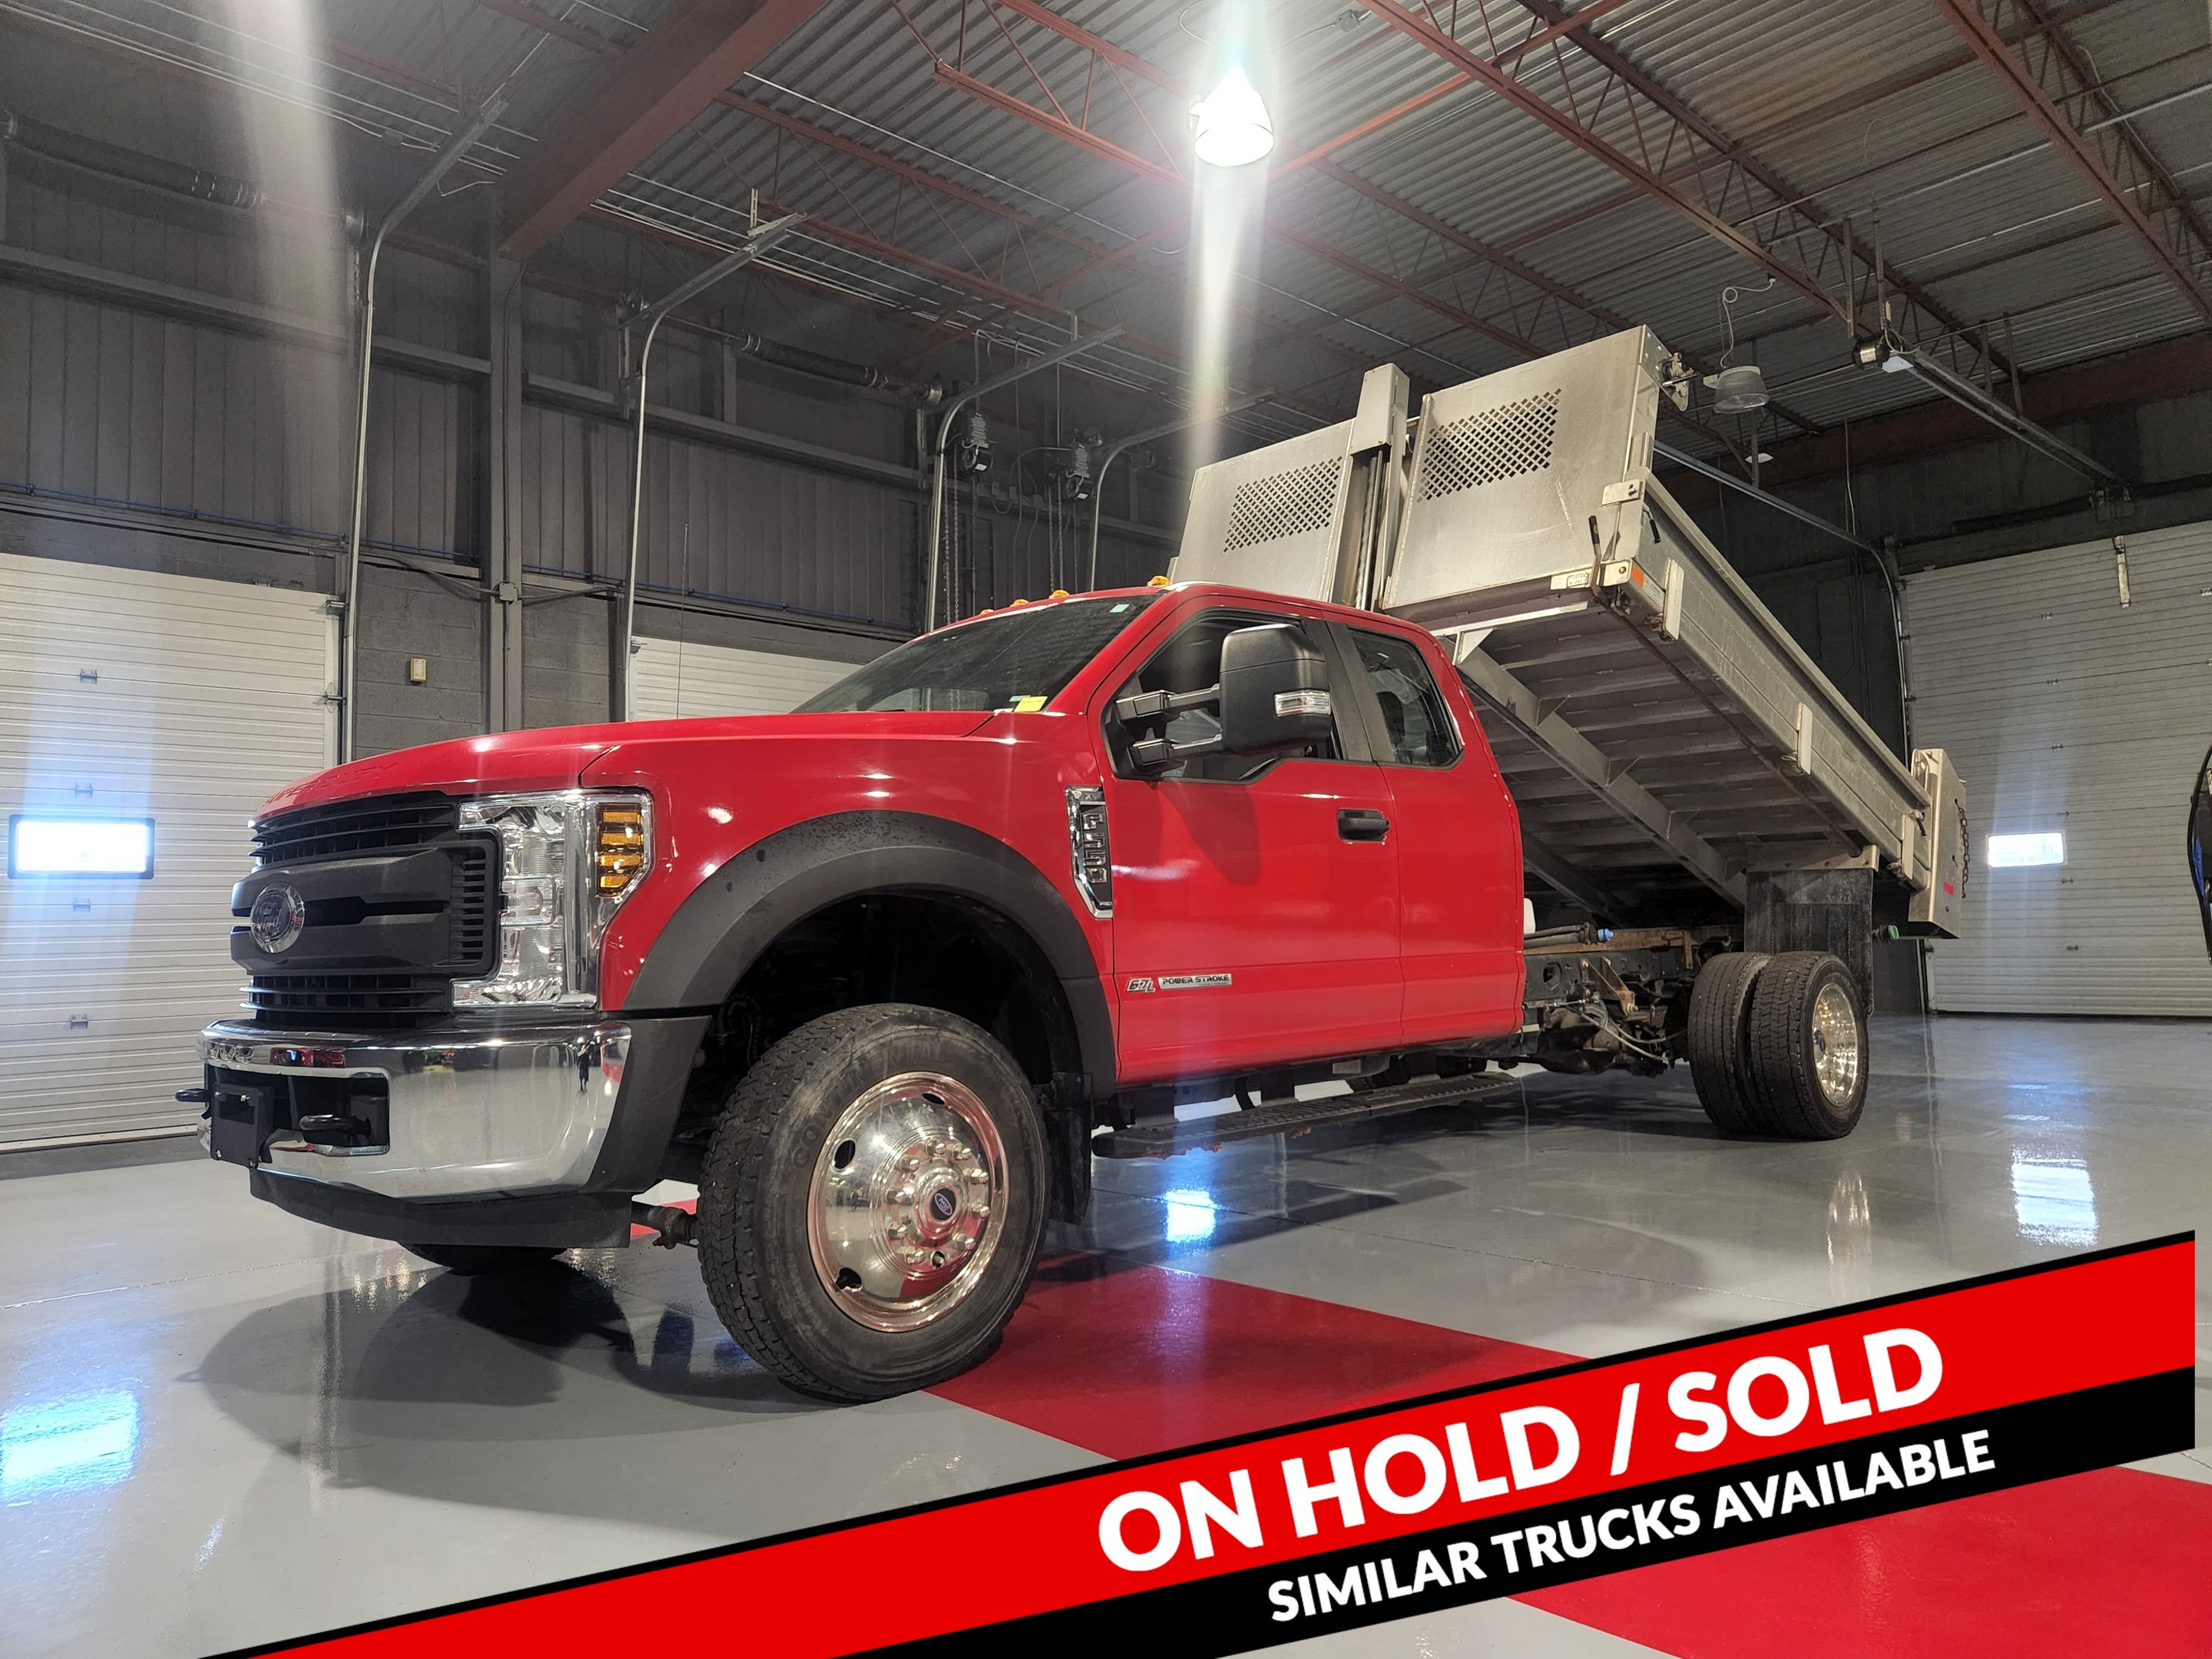 2018 Ford F-550 Ext Cab, 11.5' Aluminum Dump, ONLY 86,974KM